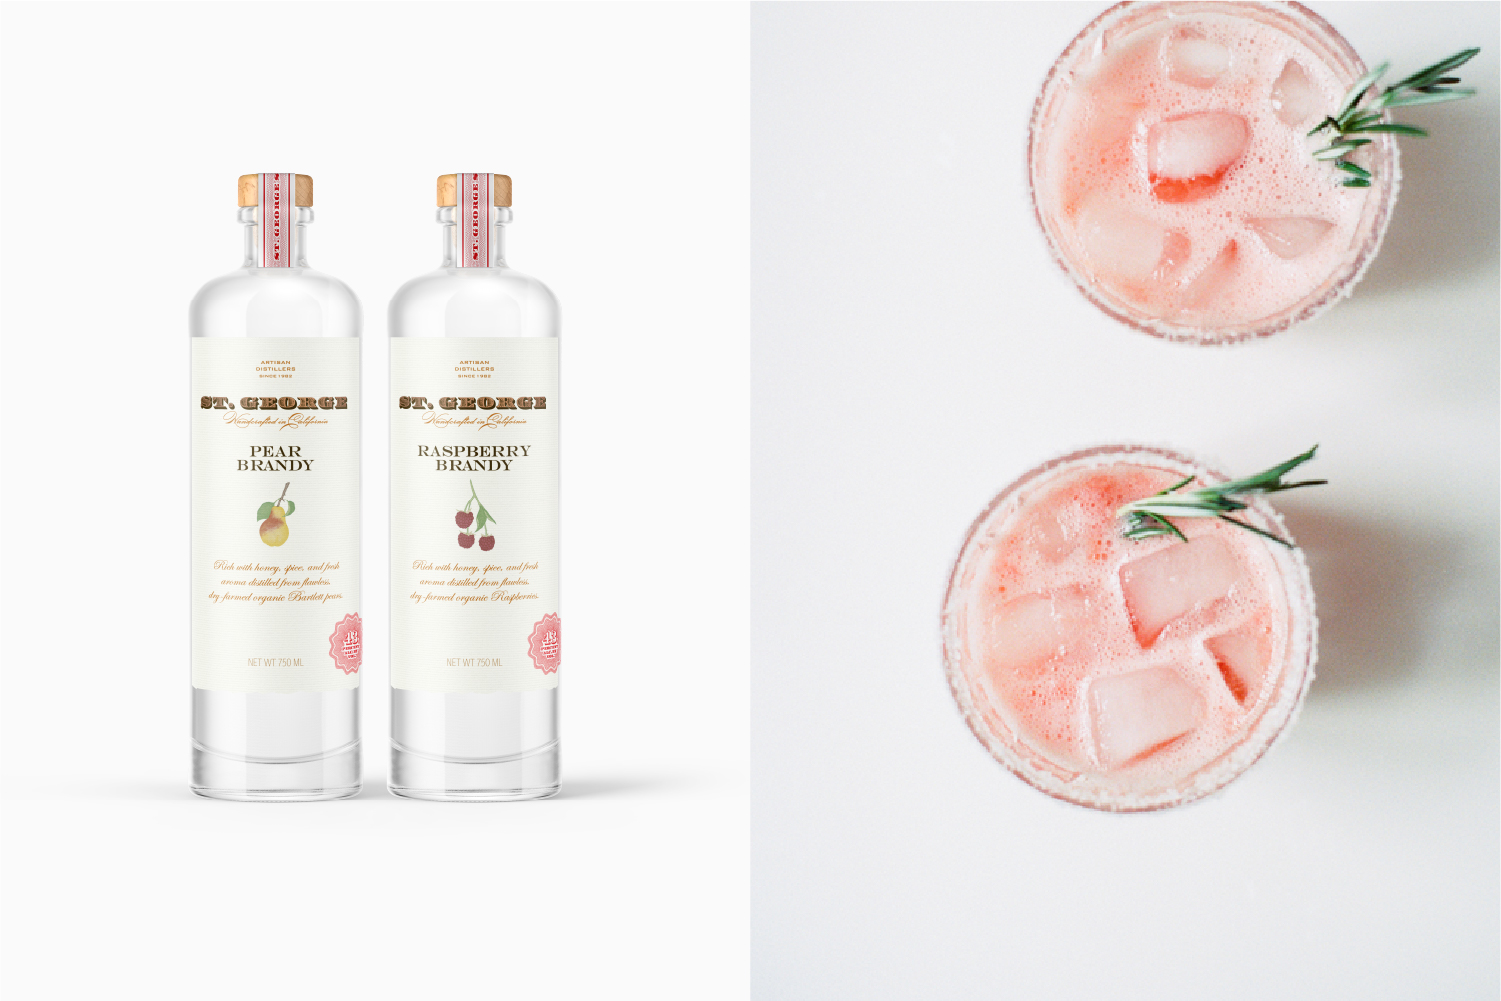 St. George Spirits Pear and Raspberry Brandy packaging design concepts.